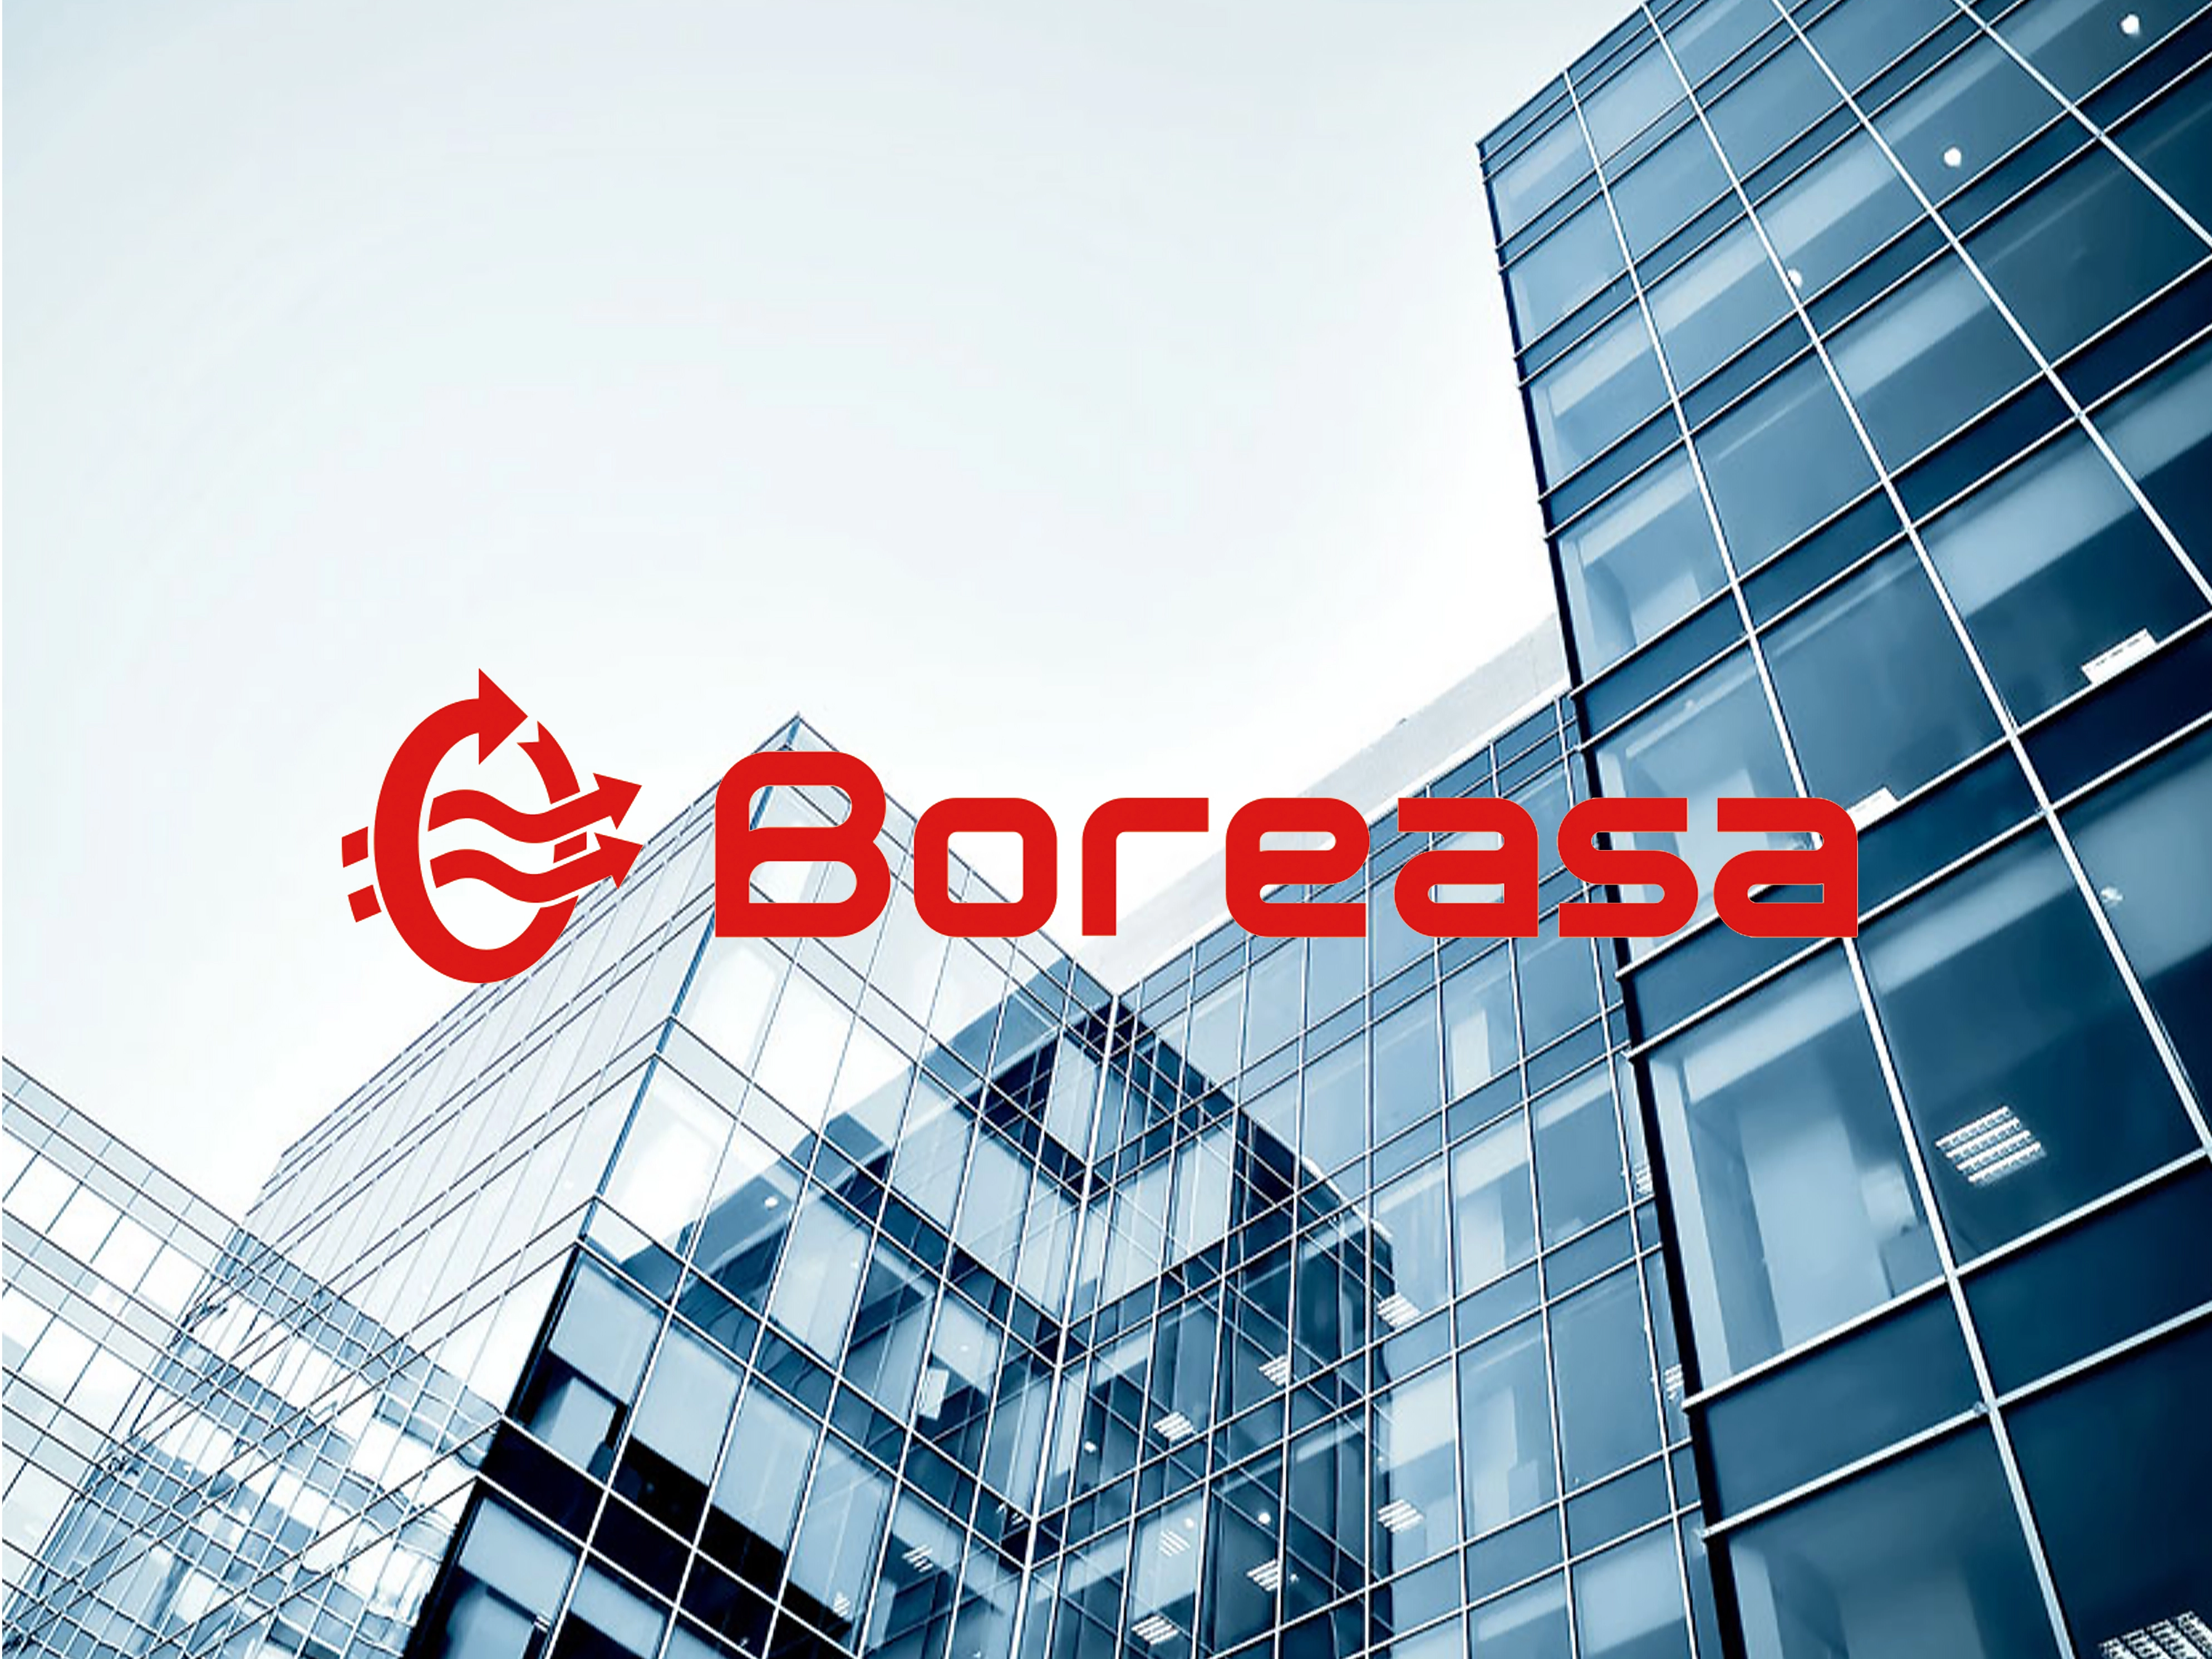 Boreasa Technologies Co., Ltd. and Boreasa Mechatronics Co., Ltd. have been successfully awarded the title of National High-Tech Enterprises